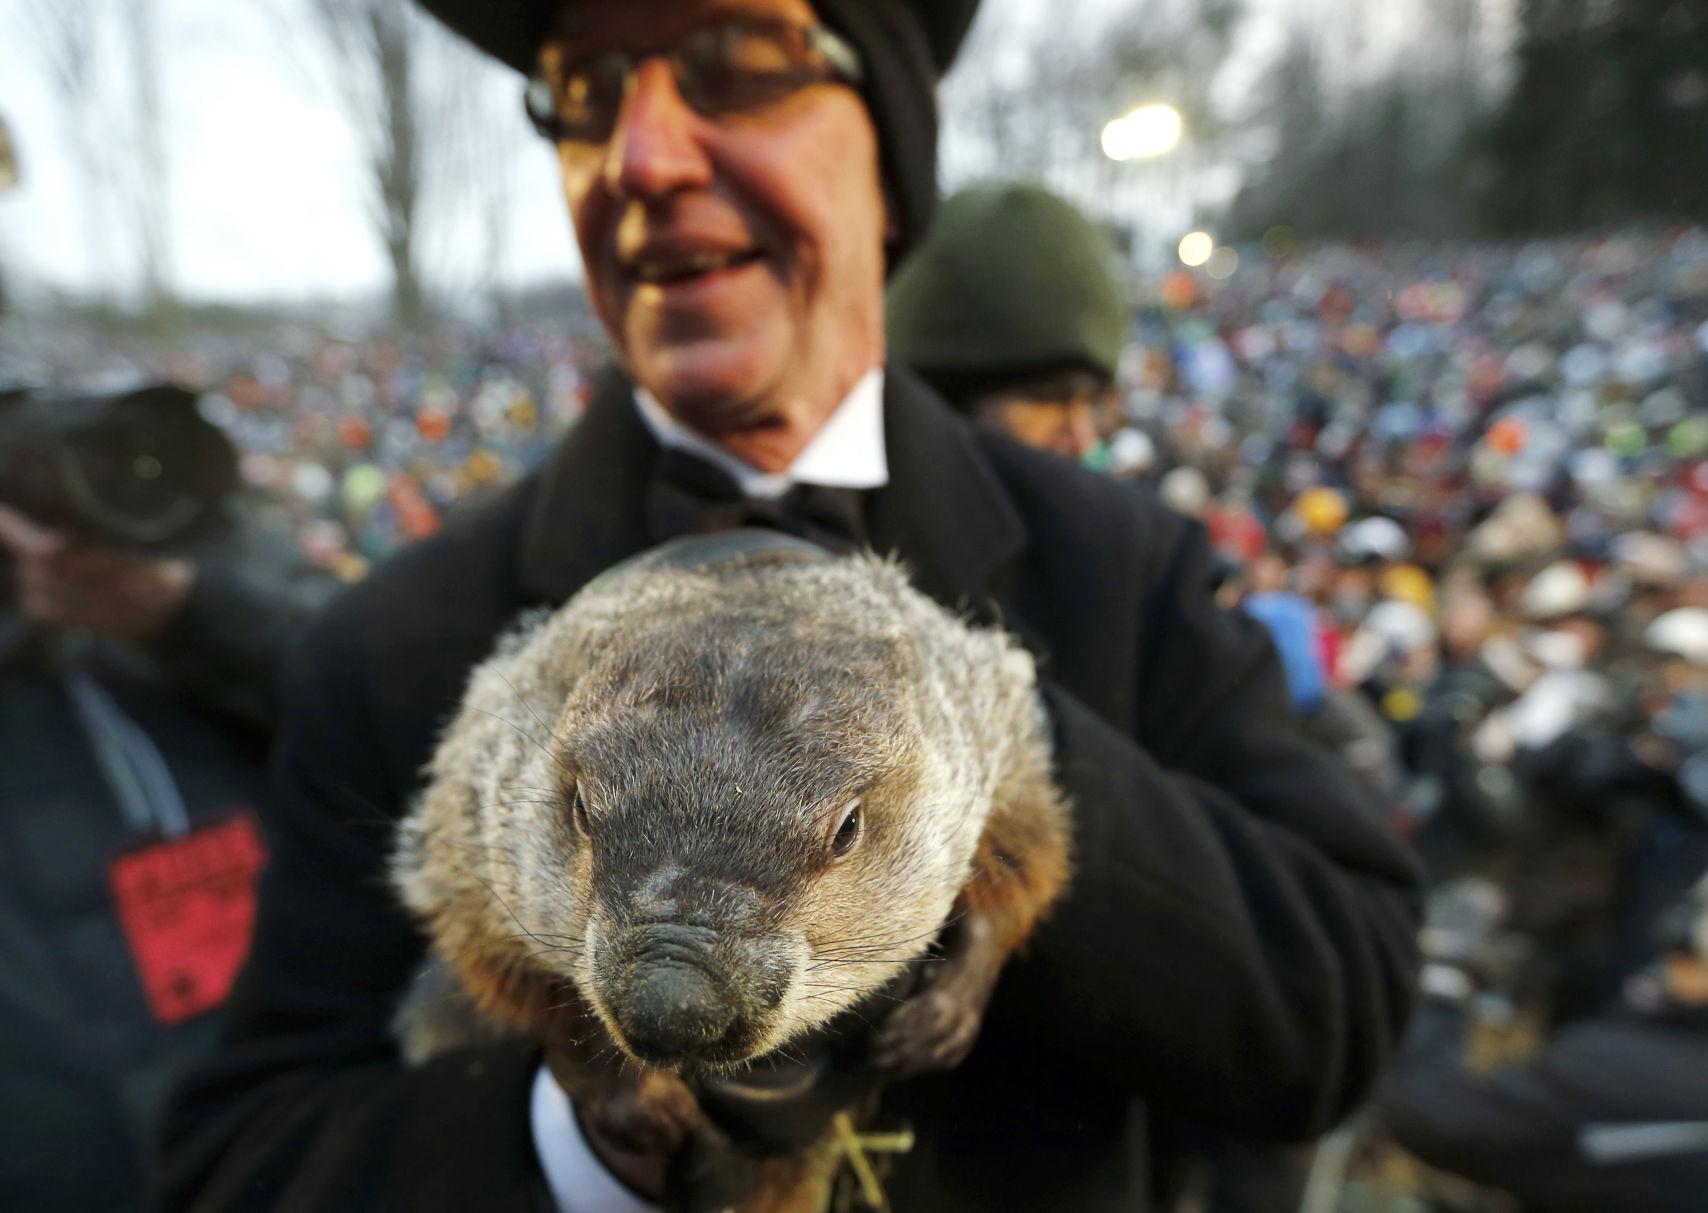 18 photos of groundhogs to celebrate Groundhog Day 2018 | National